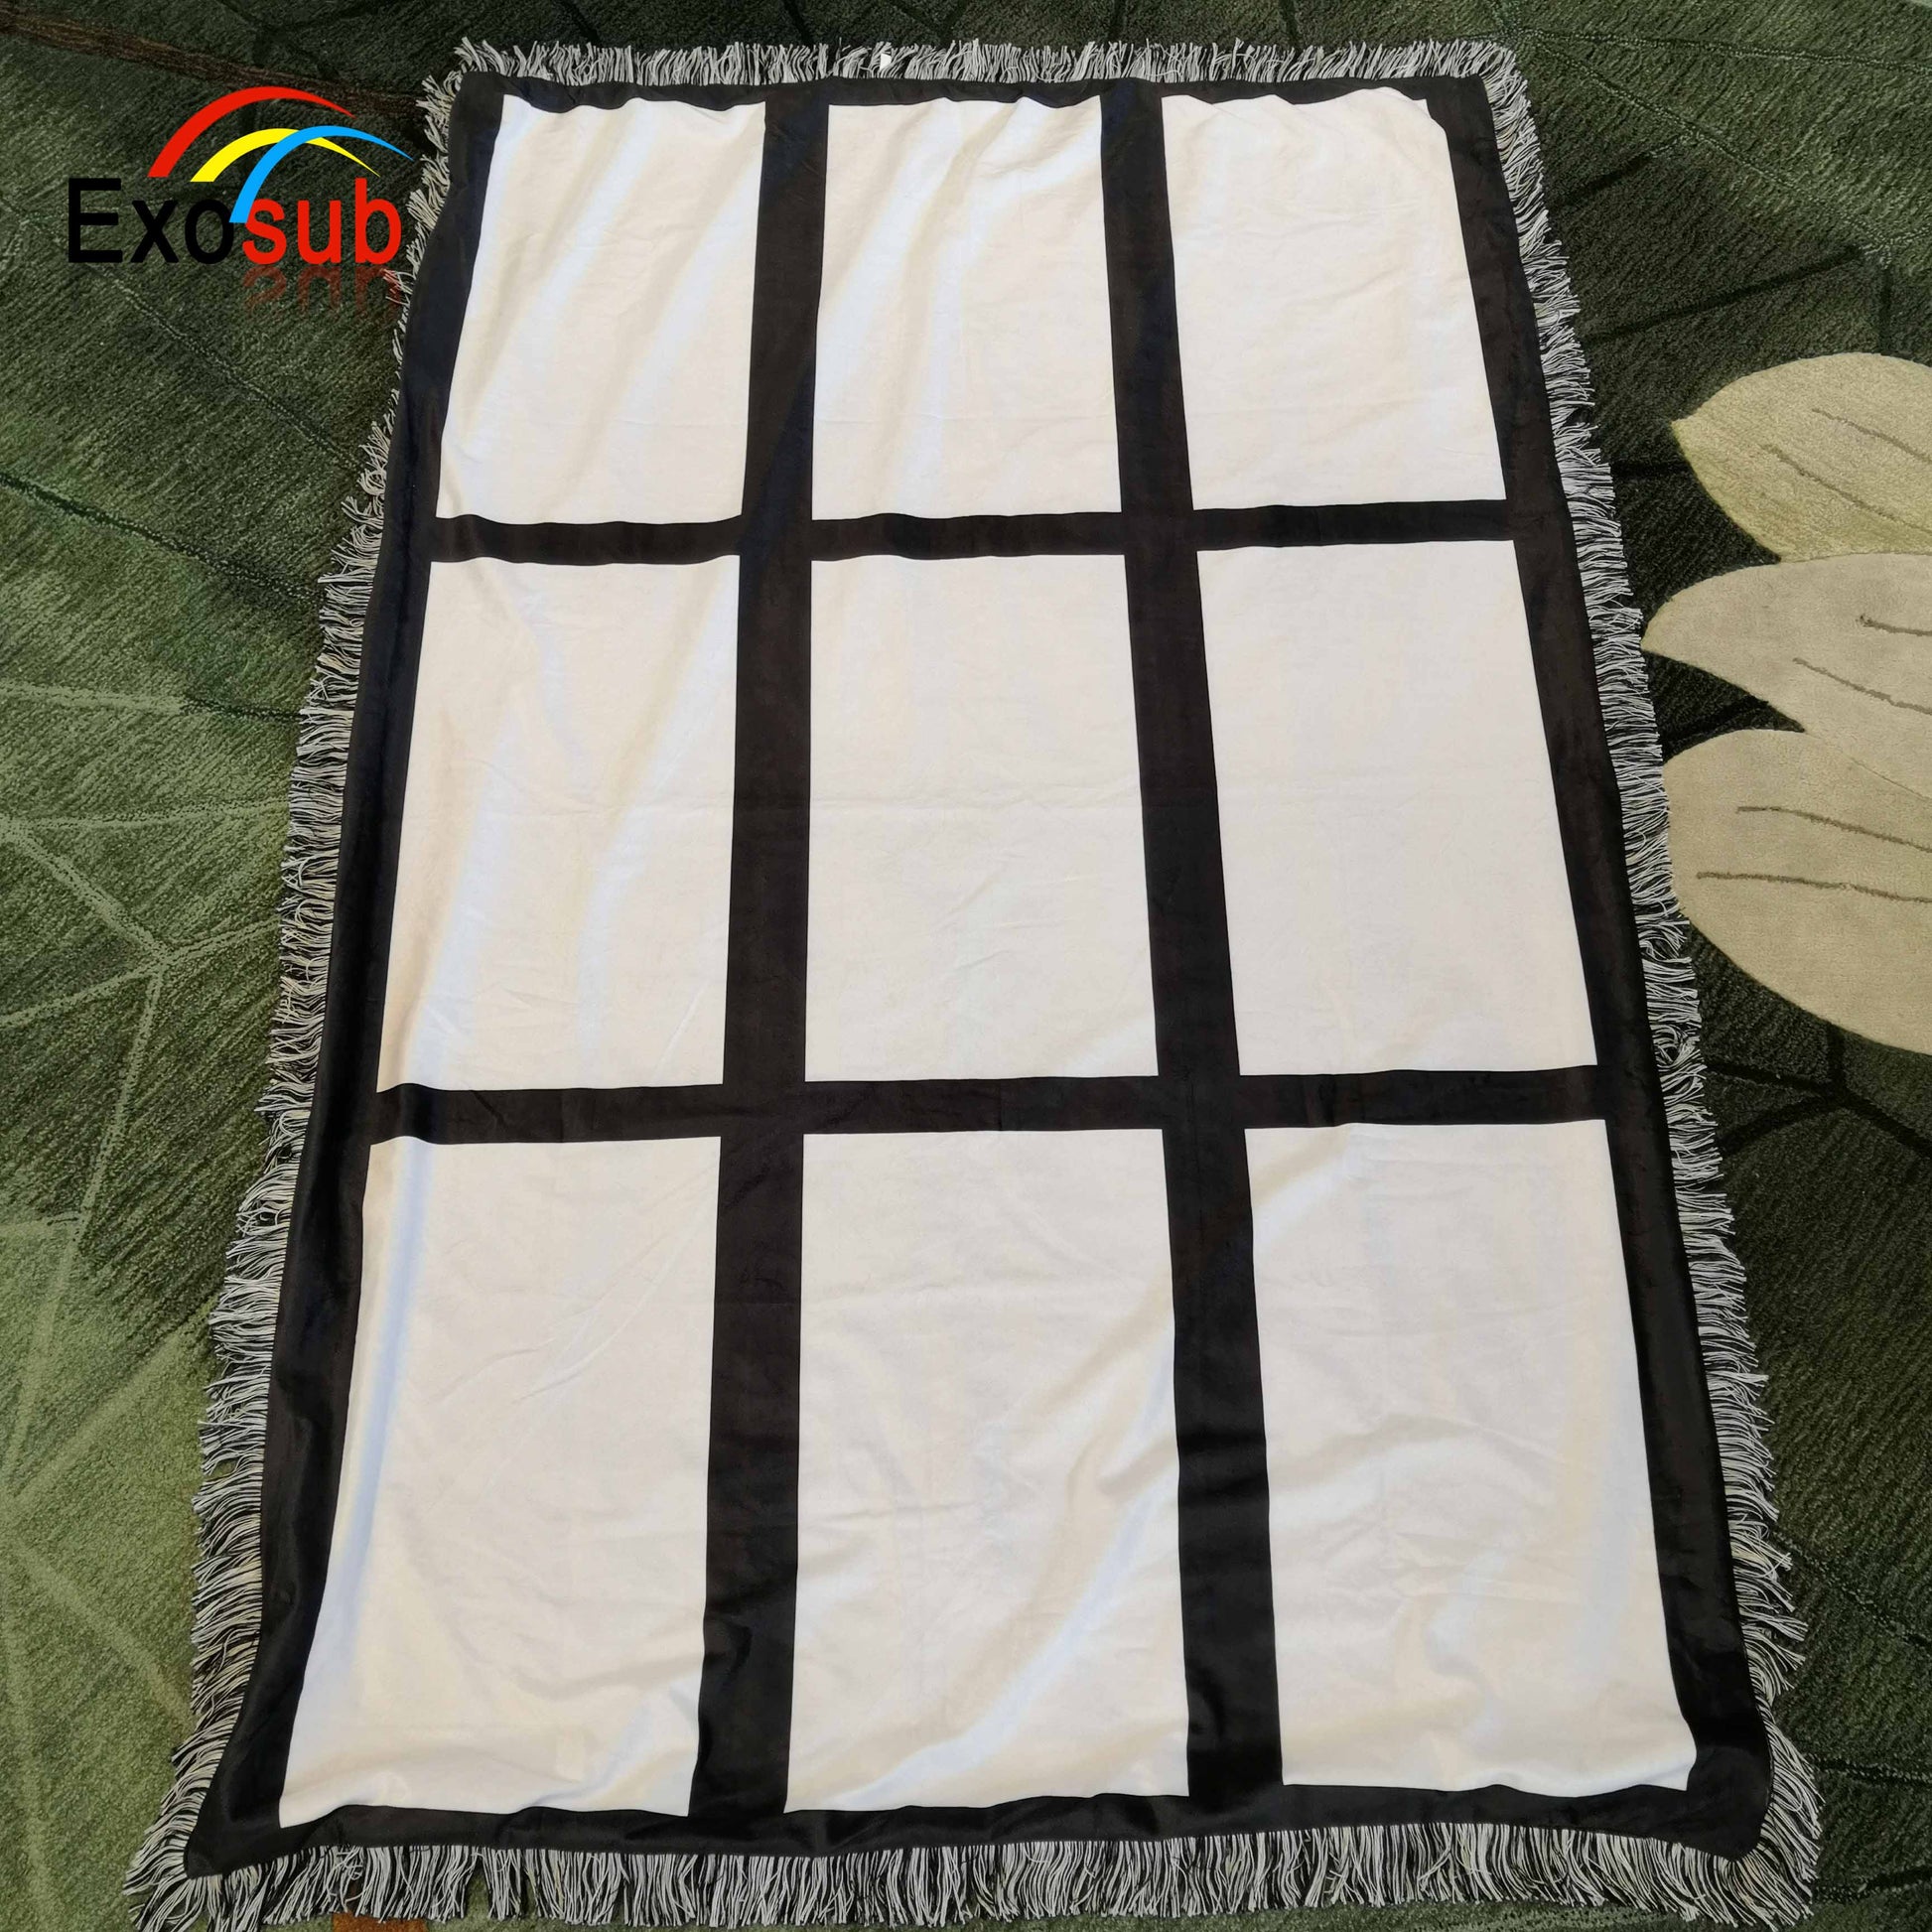 Sublimated Blank Panel Blankets 20 15 9 Grids Background Photos Image DIY  Personalized Custom Sublimation Blanket - AliExpress